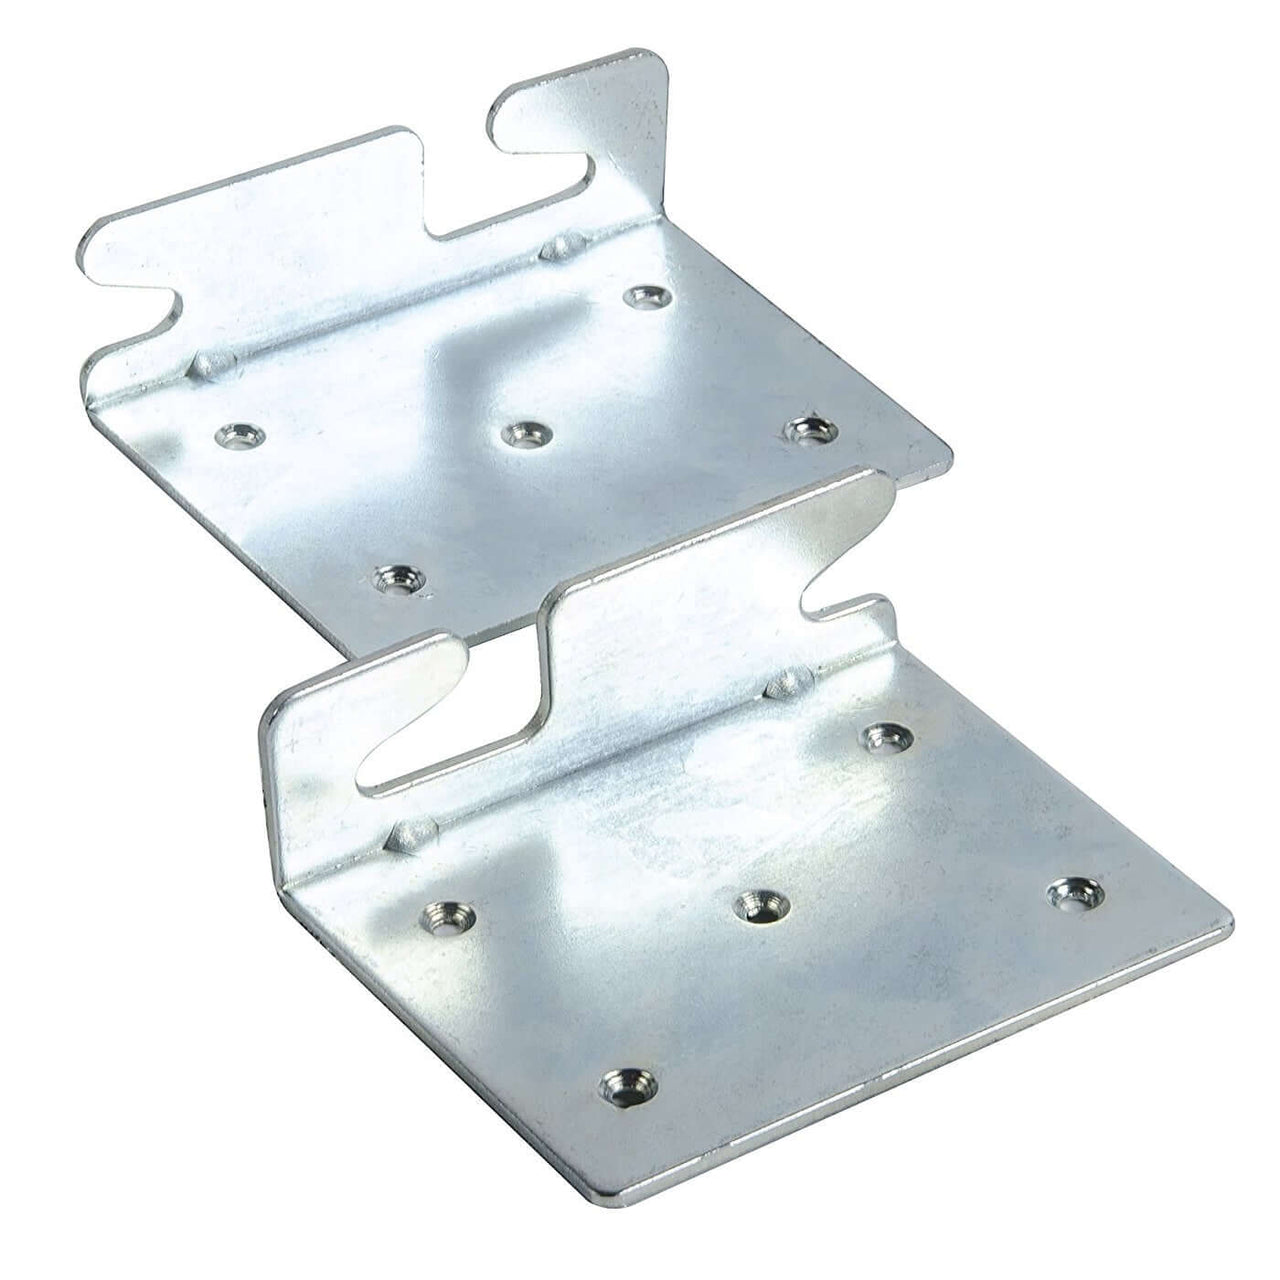 Bed Claw Angled Retro-Hook Plates, Set of 2 with Hardware, Restore Wooden Bed Frame Side Rails